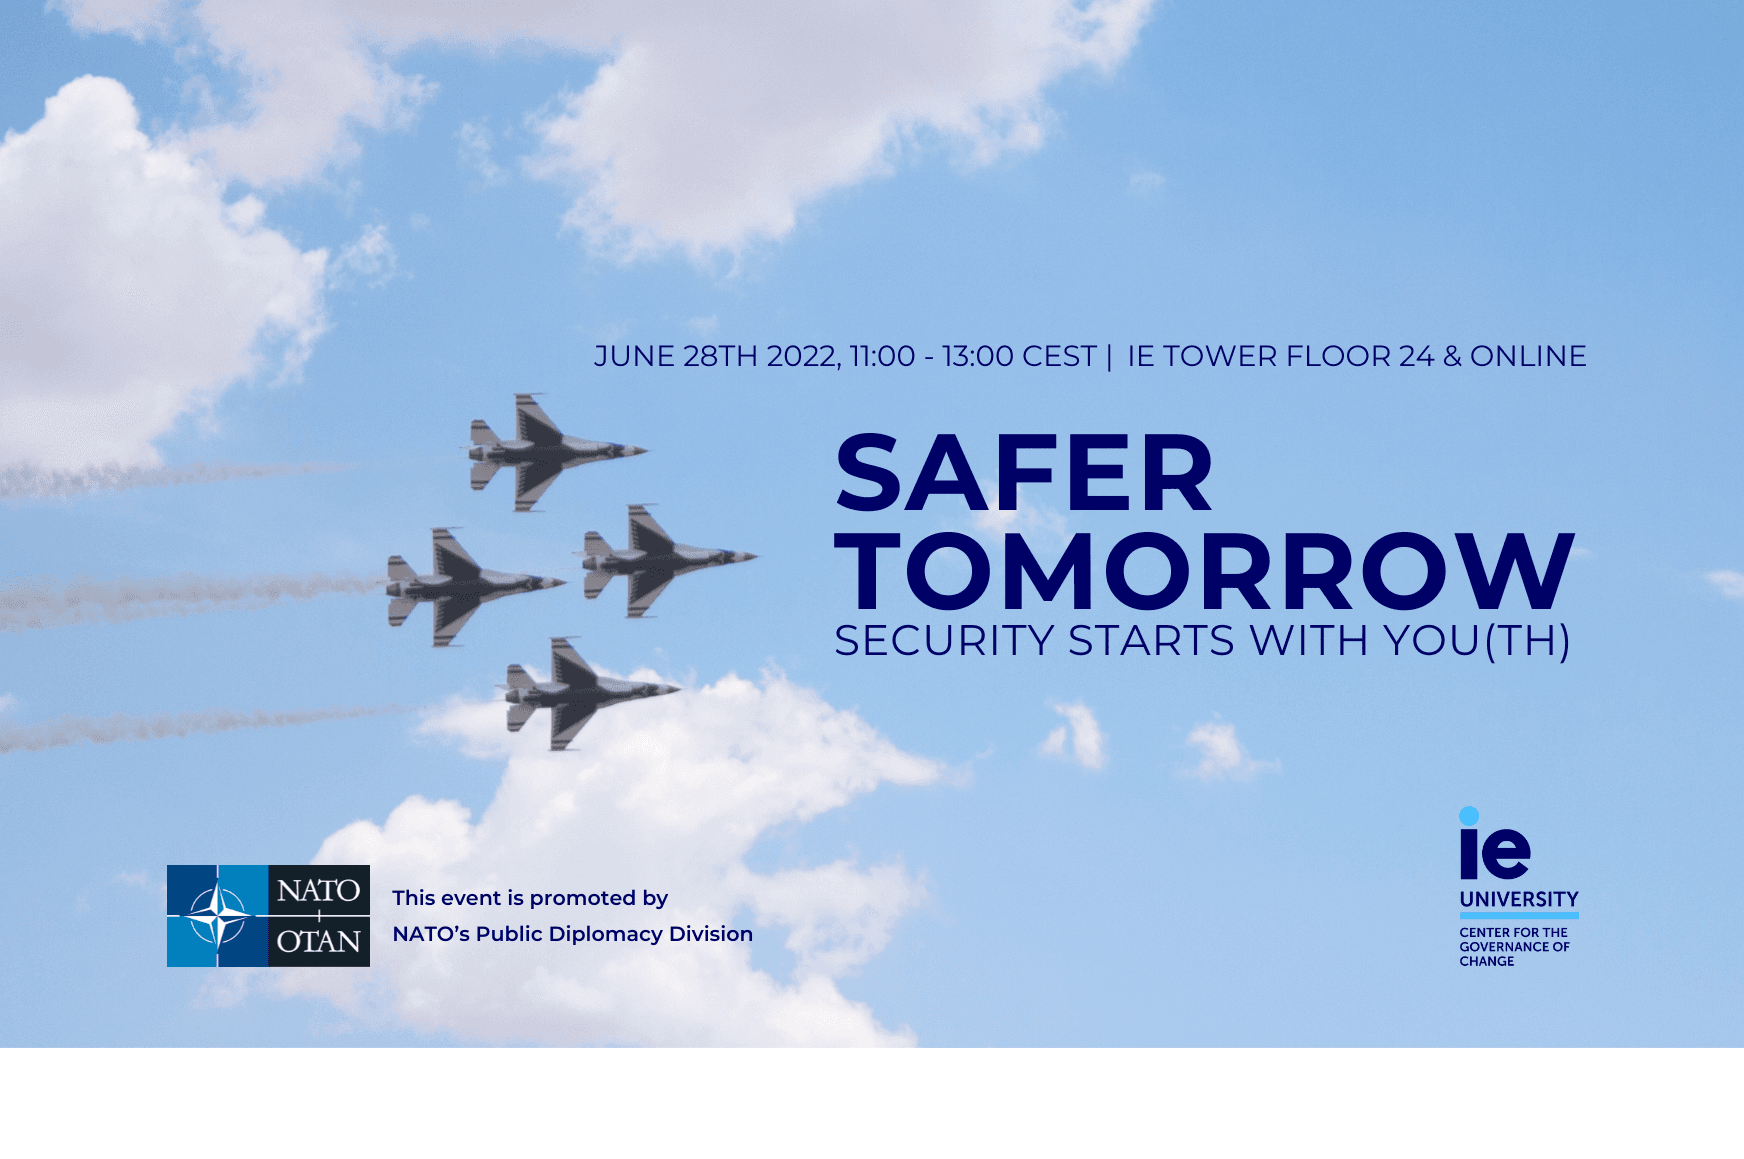 Advertisement for a NATO event titled 'Safer Tomorrow', featuring a flight of four military jets in formation against a clear sky, with text details about the event date and sponsors.